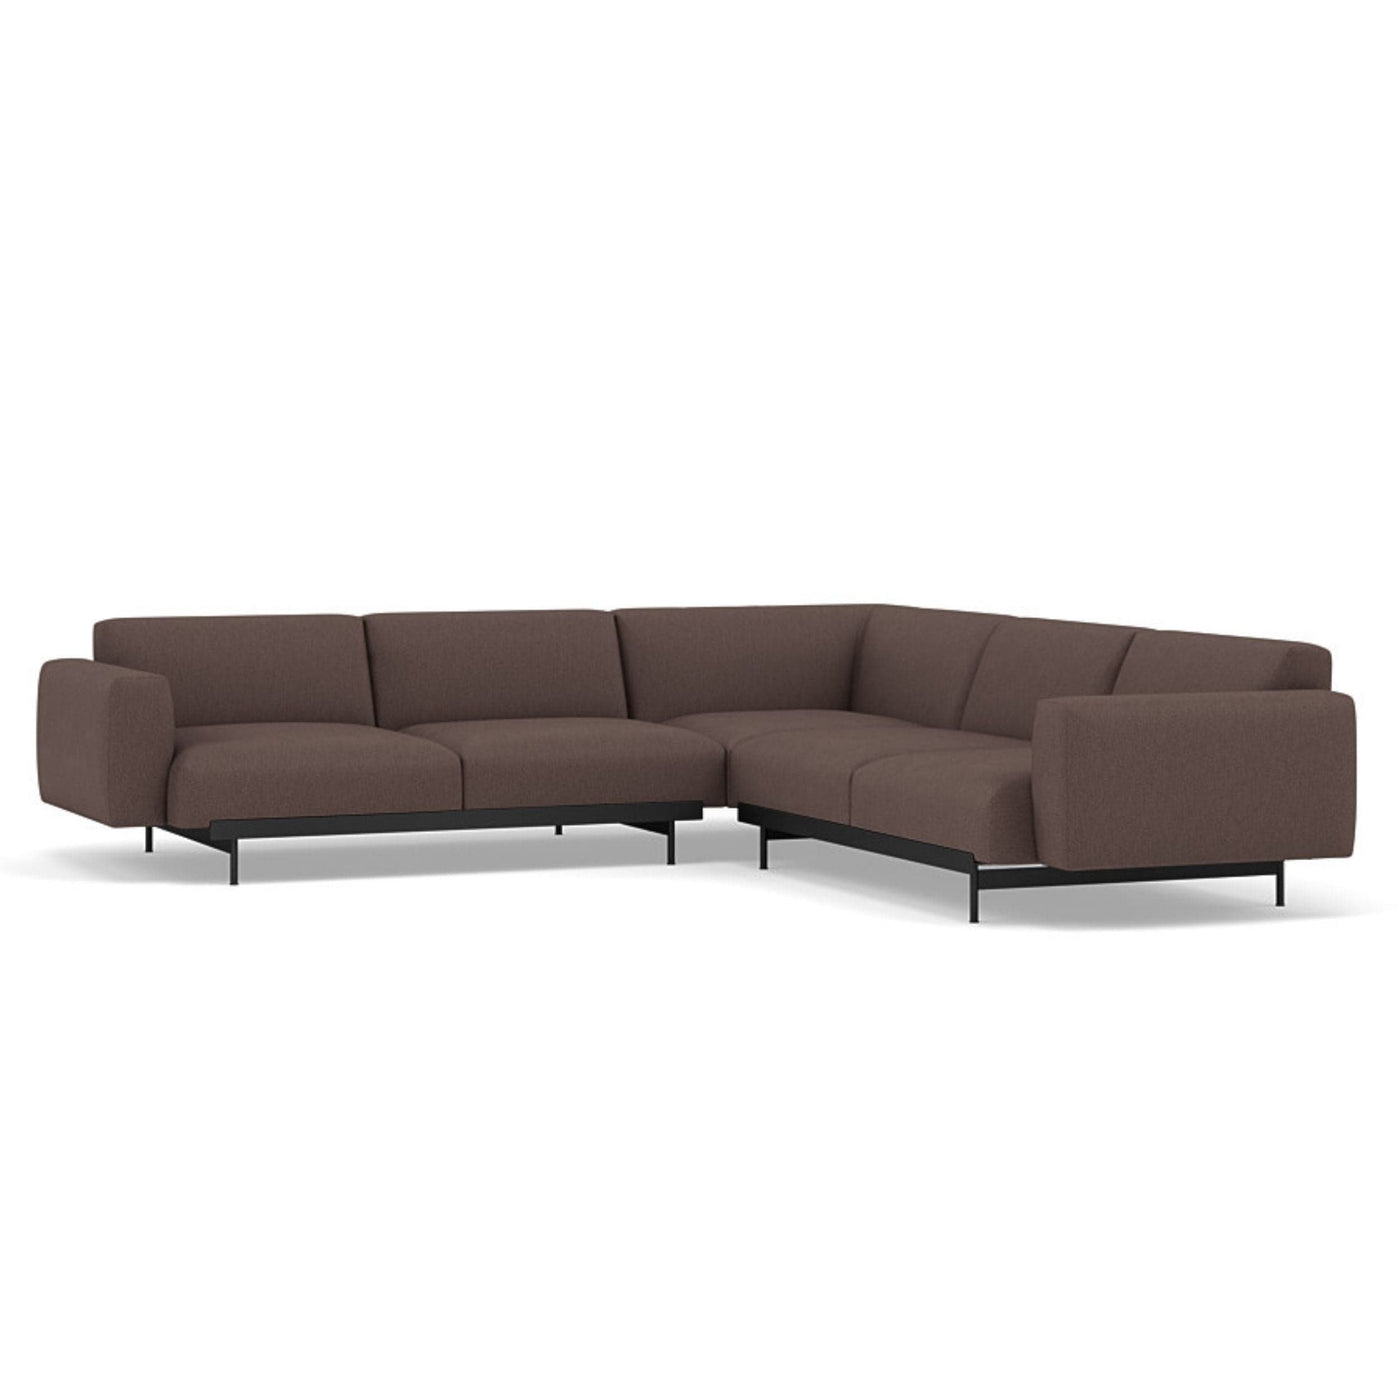 Muuto In Situ corner sofa, configuration 1 in clay 6 fabric. Made to order from someday designs. #colour_clay-6-red-brown